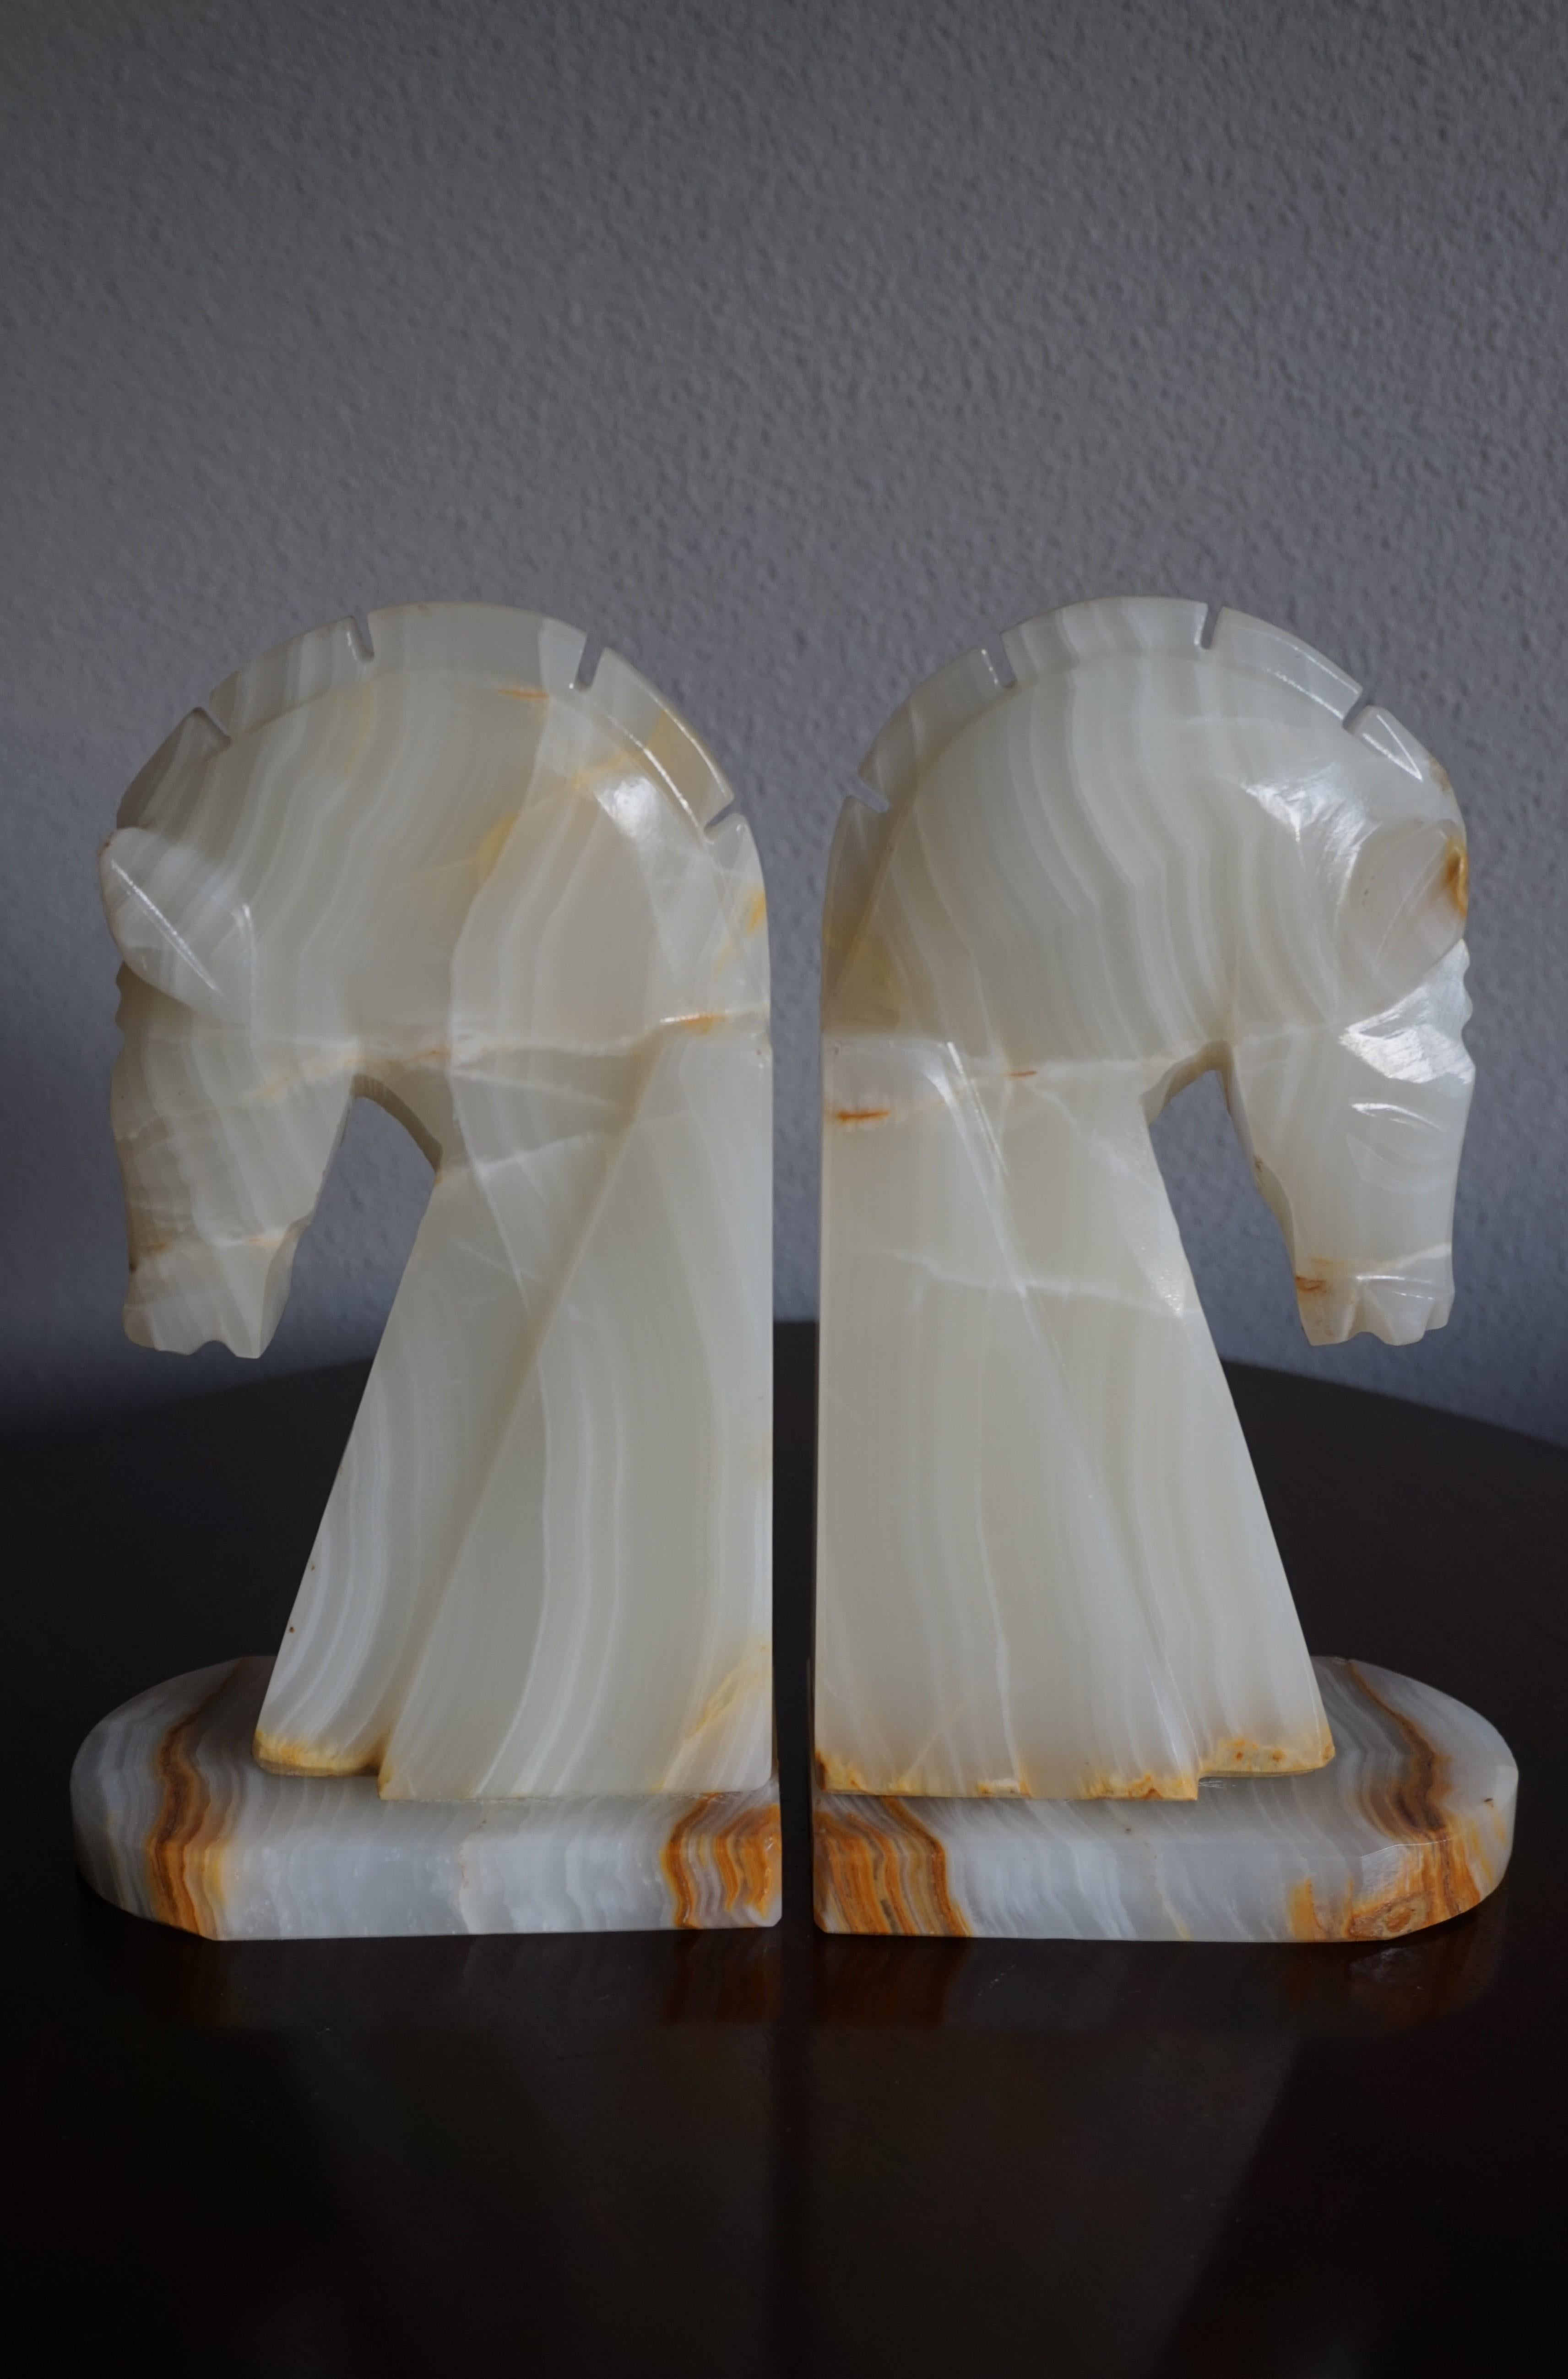 Hand-Crafted Midcentury Era Pair of Handcrafted Art Deco Style Horse Sculpture Onyx Bookends